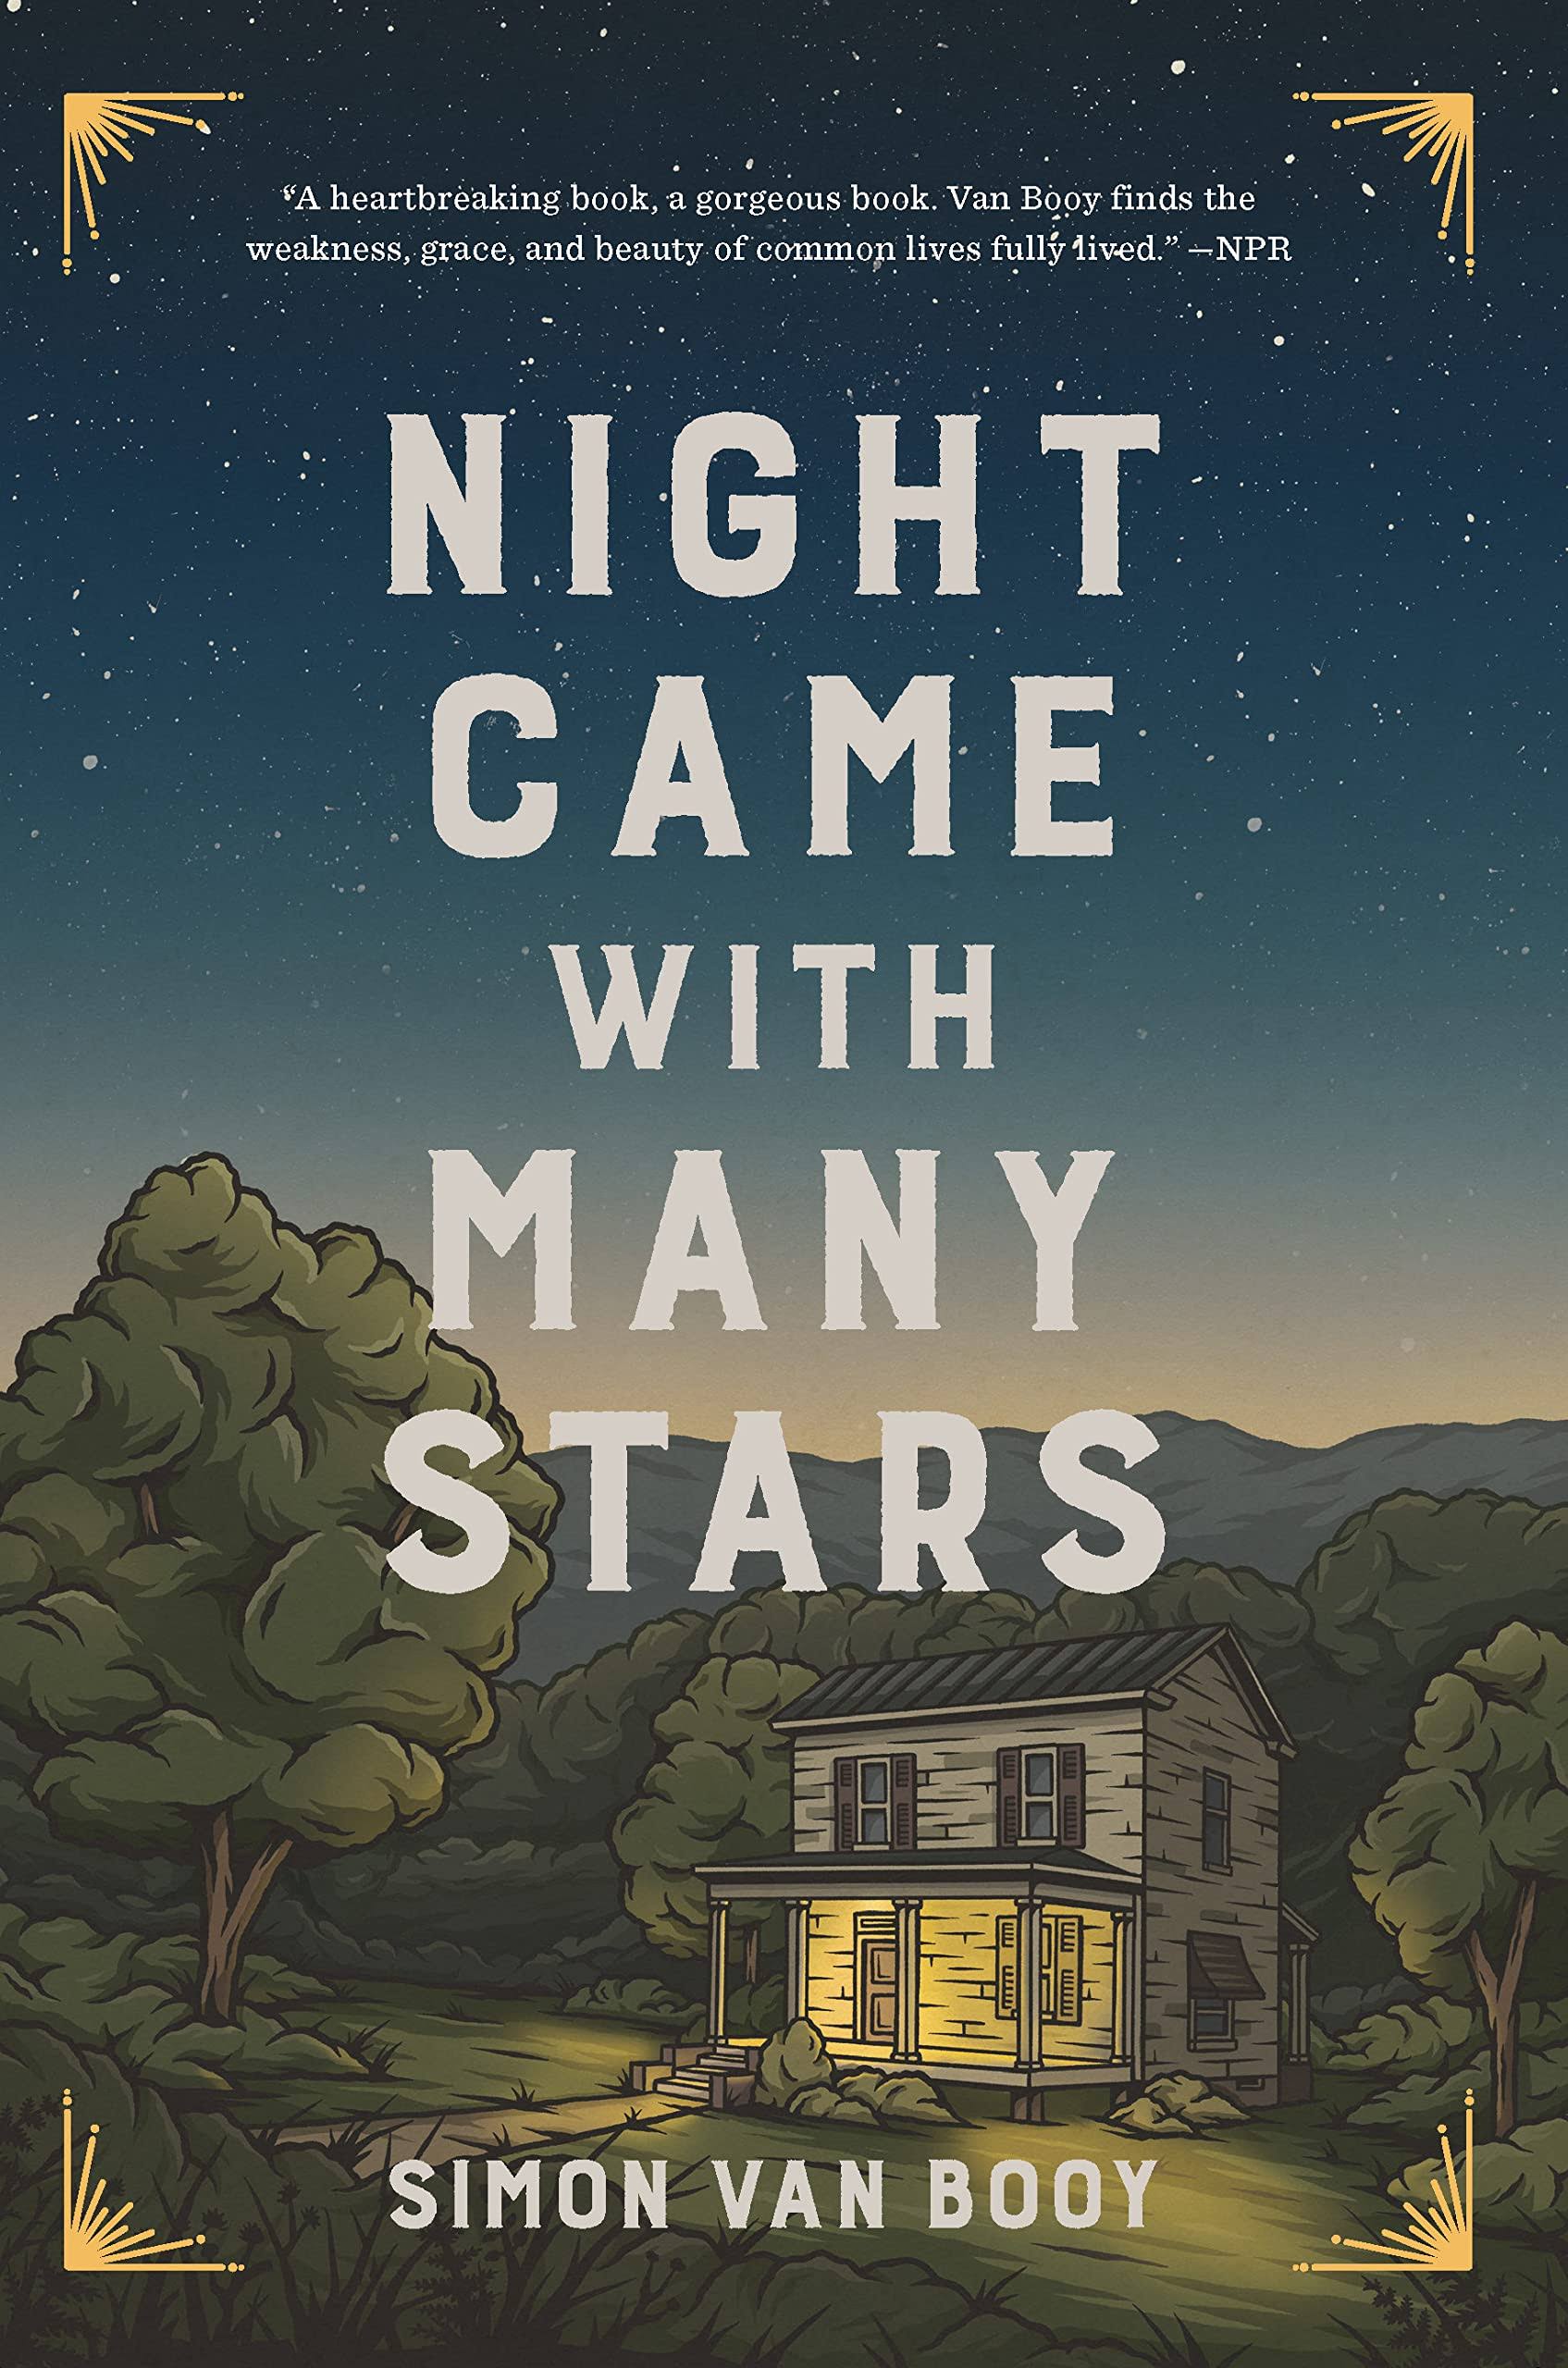 Night Came with Many Stars [Book]